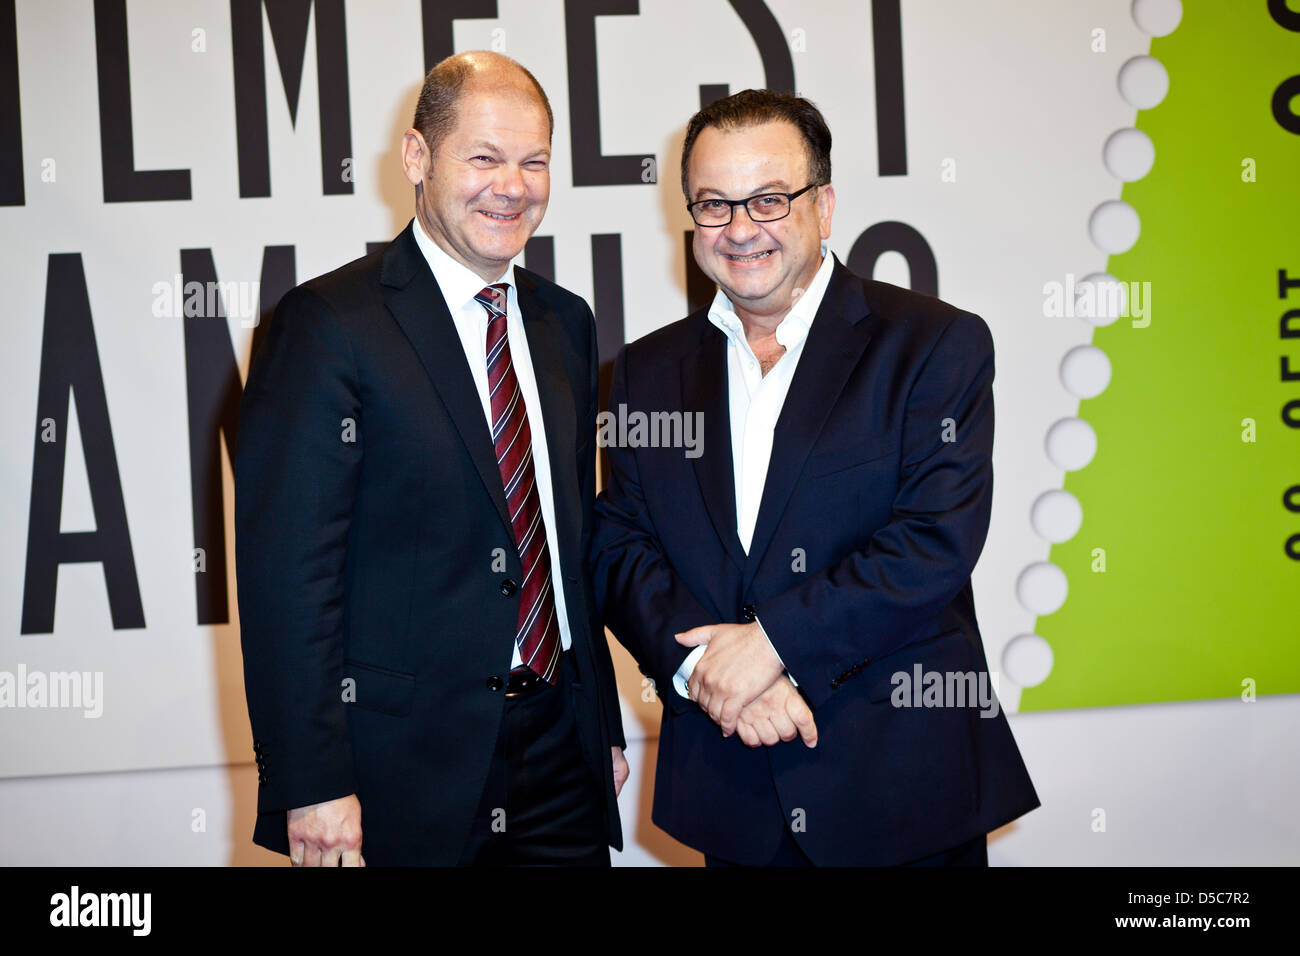 Olaf Scholz and guest at the launch of Filmfest Hamburg with the premiere of 'Auf Wiedersehen' at CinemaxX movie theatre. Stock Photo